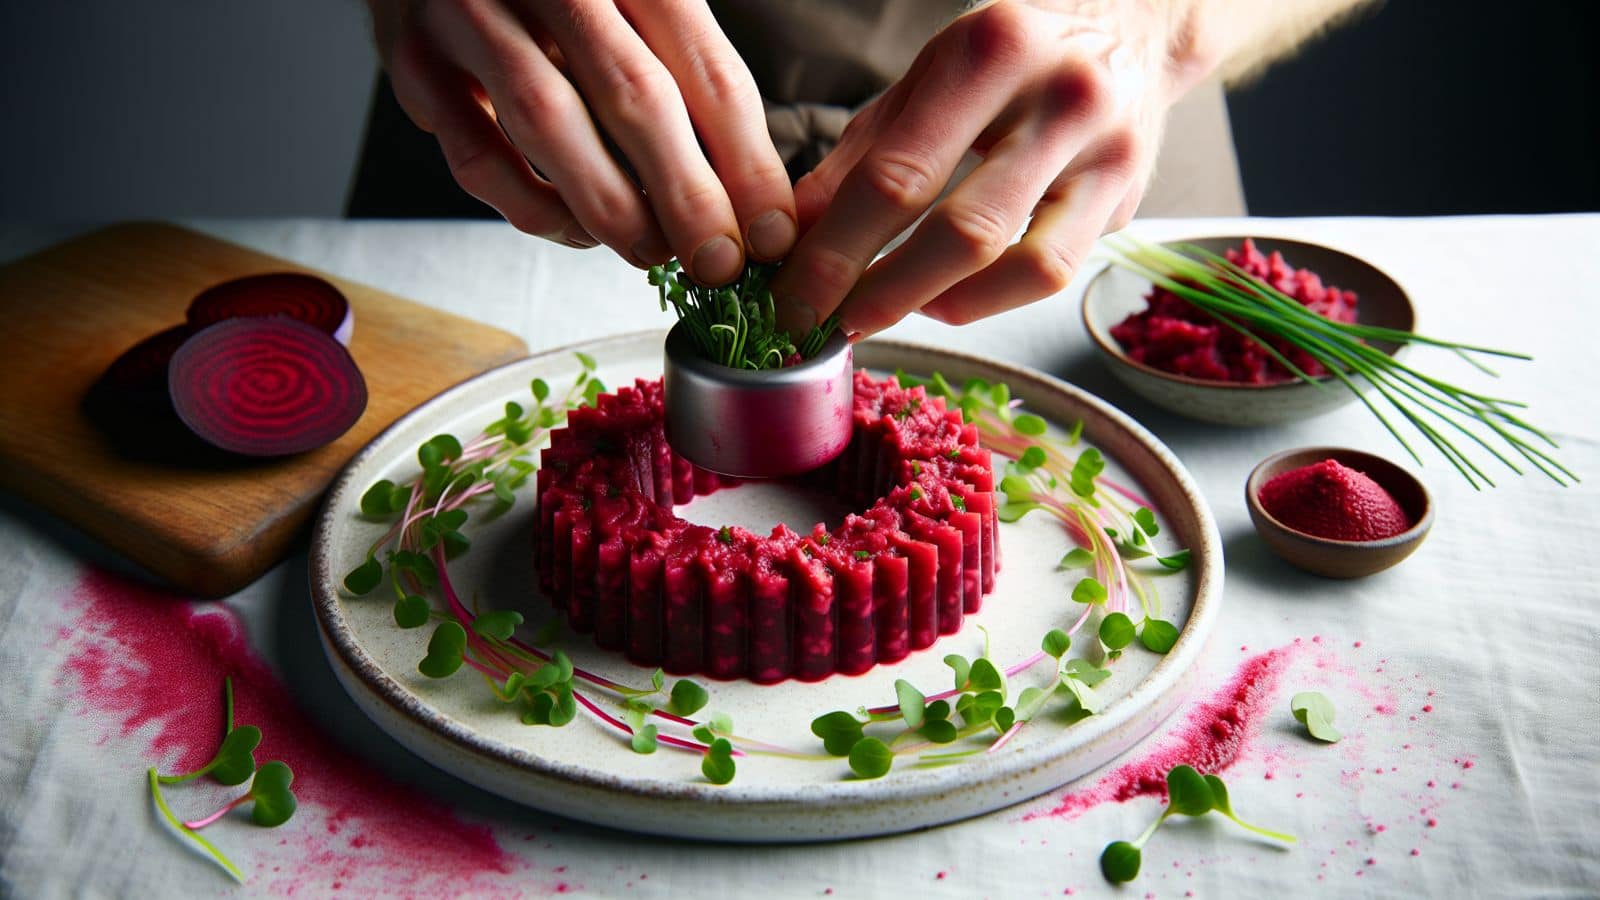 Crafting a delightful beetroot tartare: A step-by-step recipe